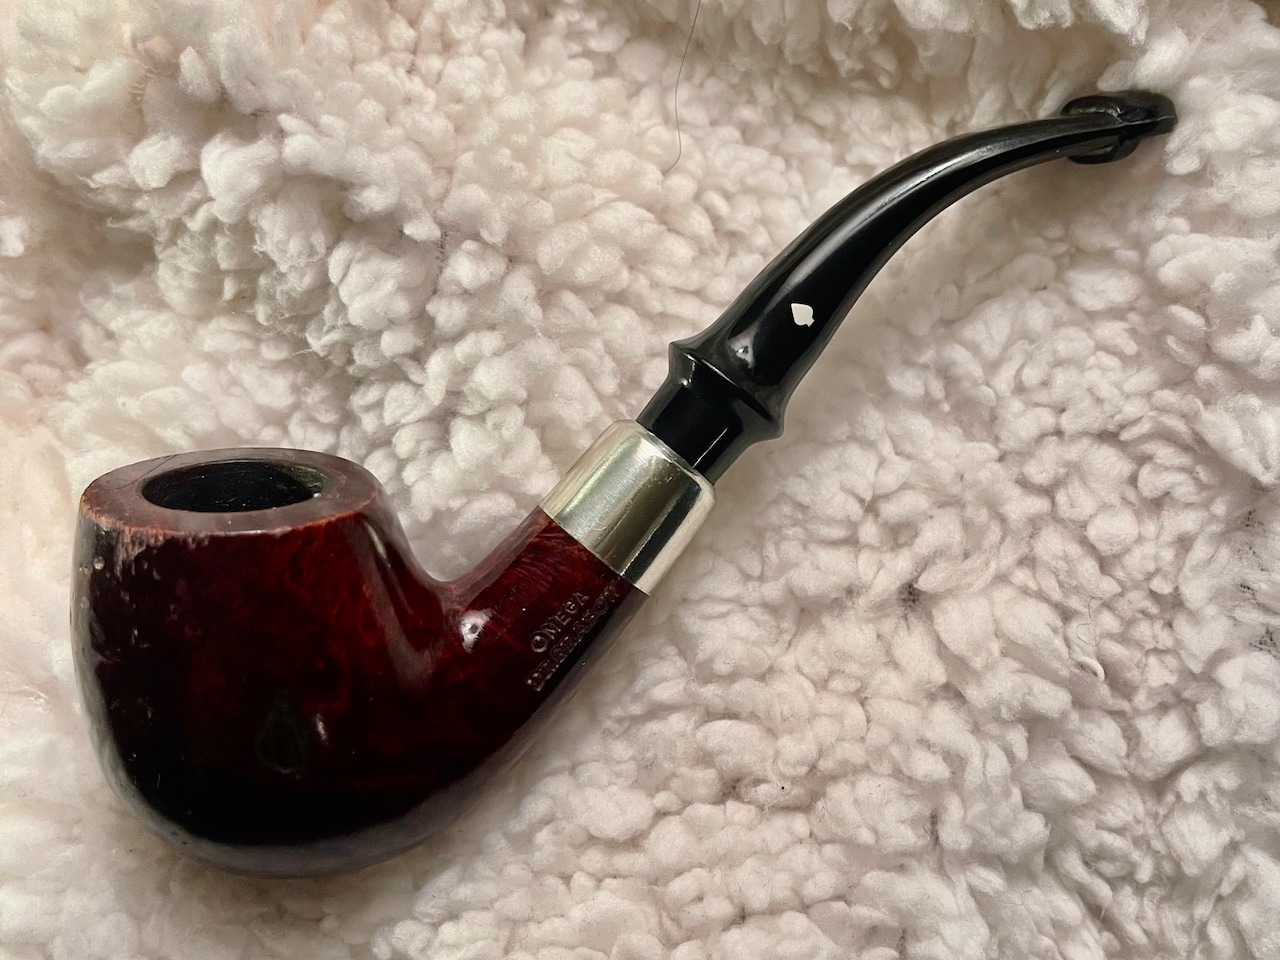 Revisit those pipe dreams: Yenke Peddler antiques [Video]